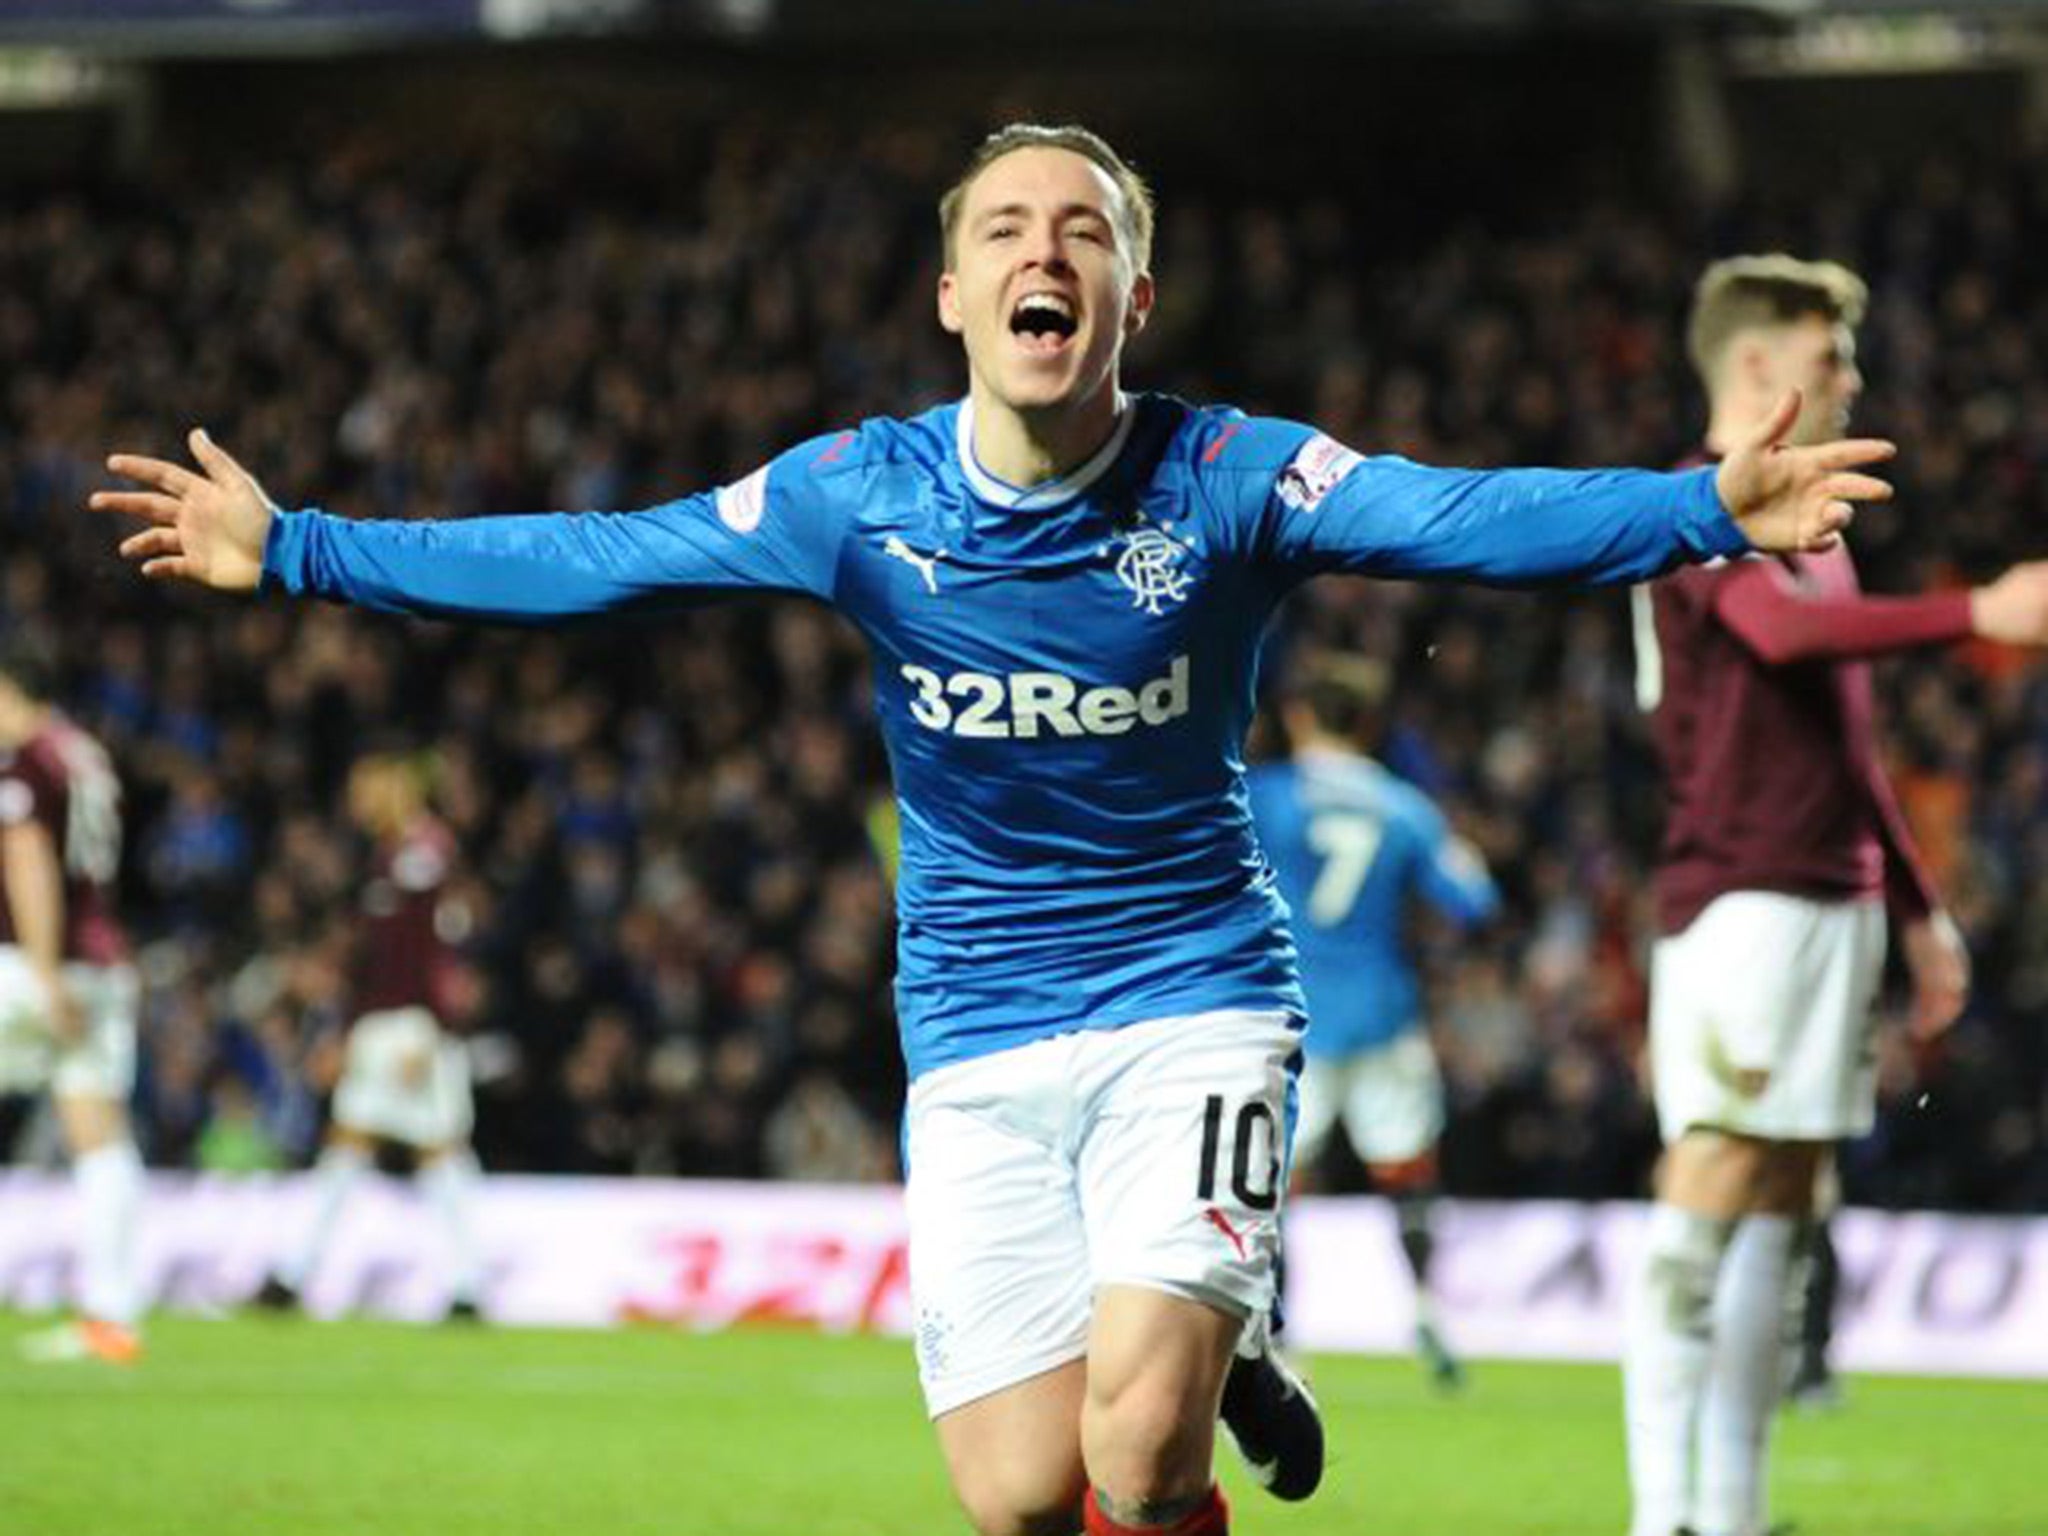 McKay scored Rangers' second with a right-footed finish